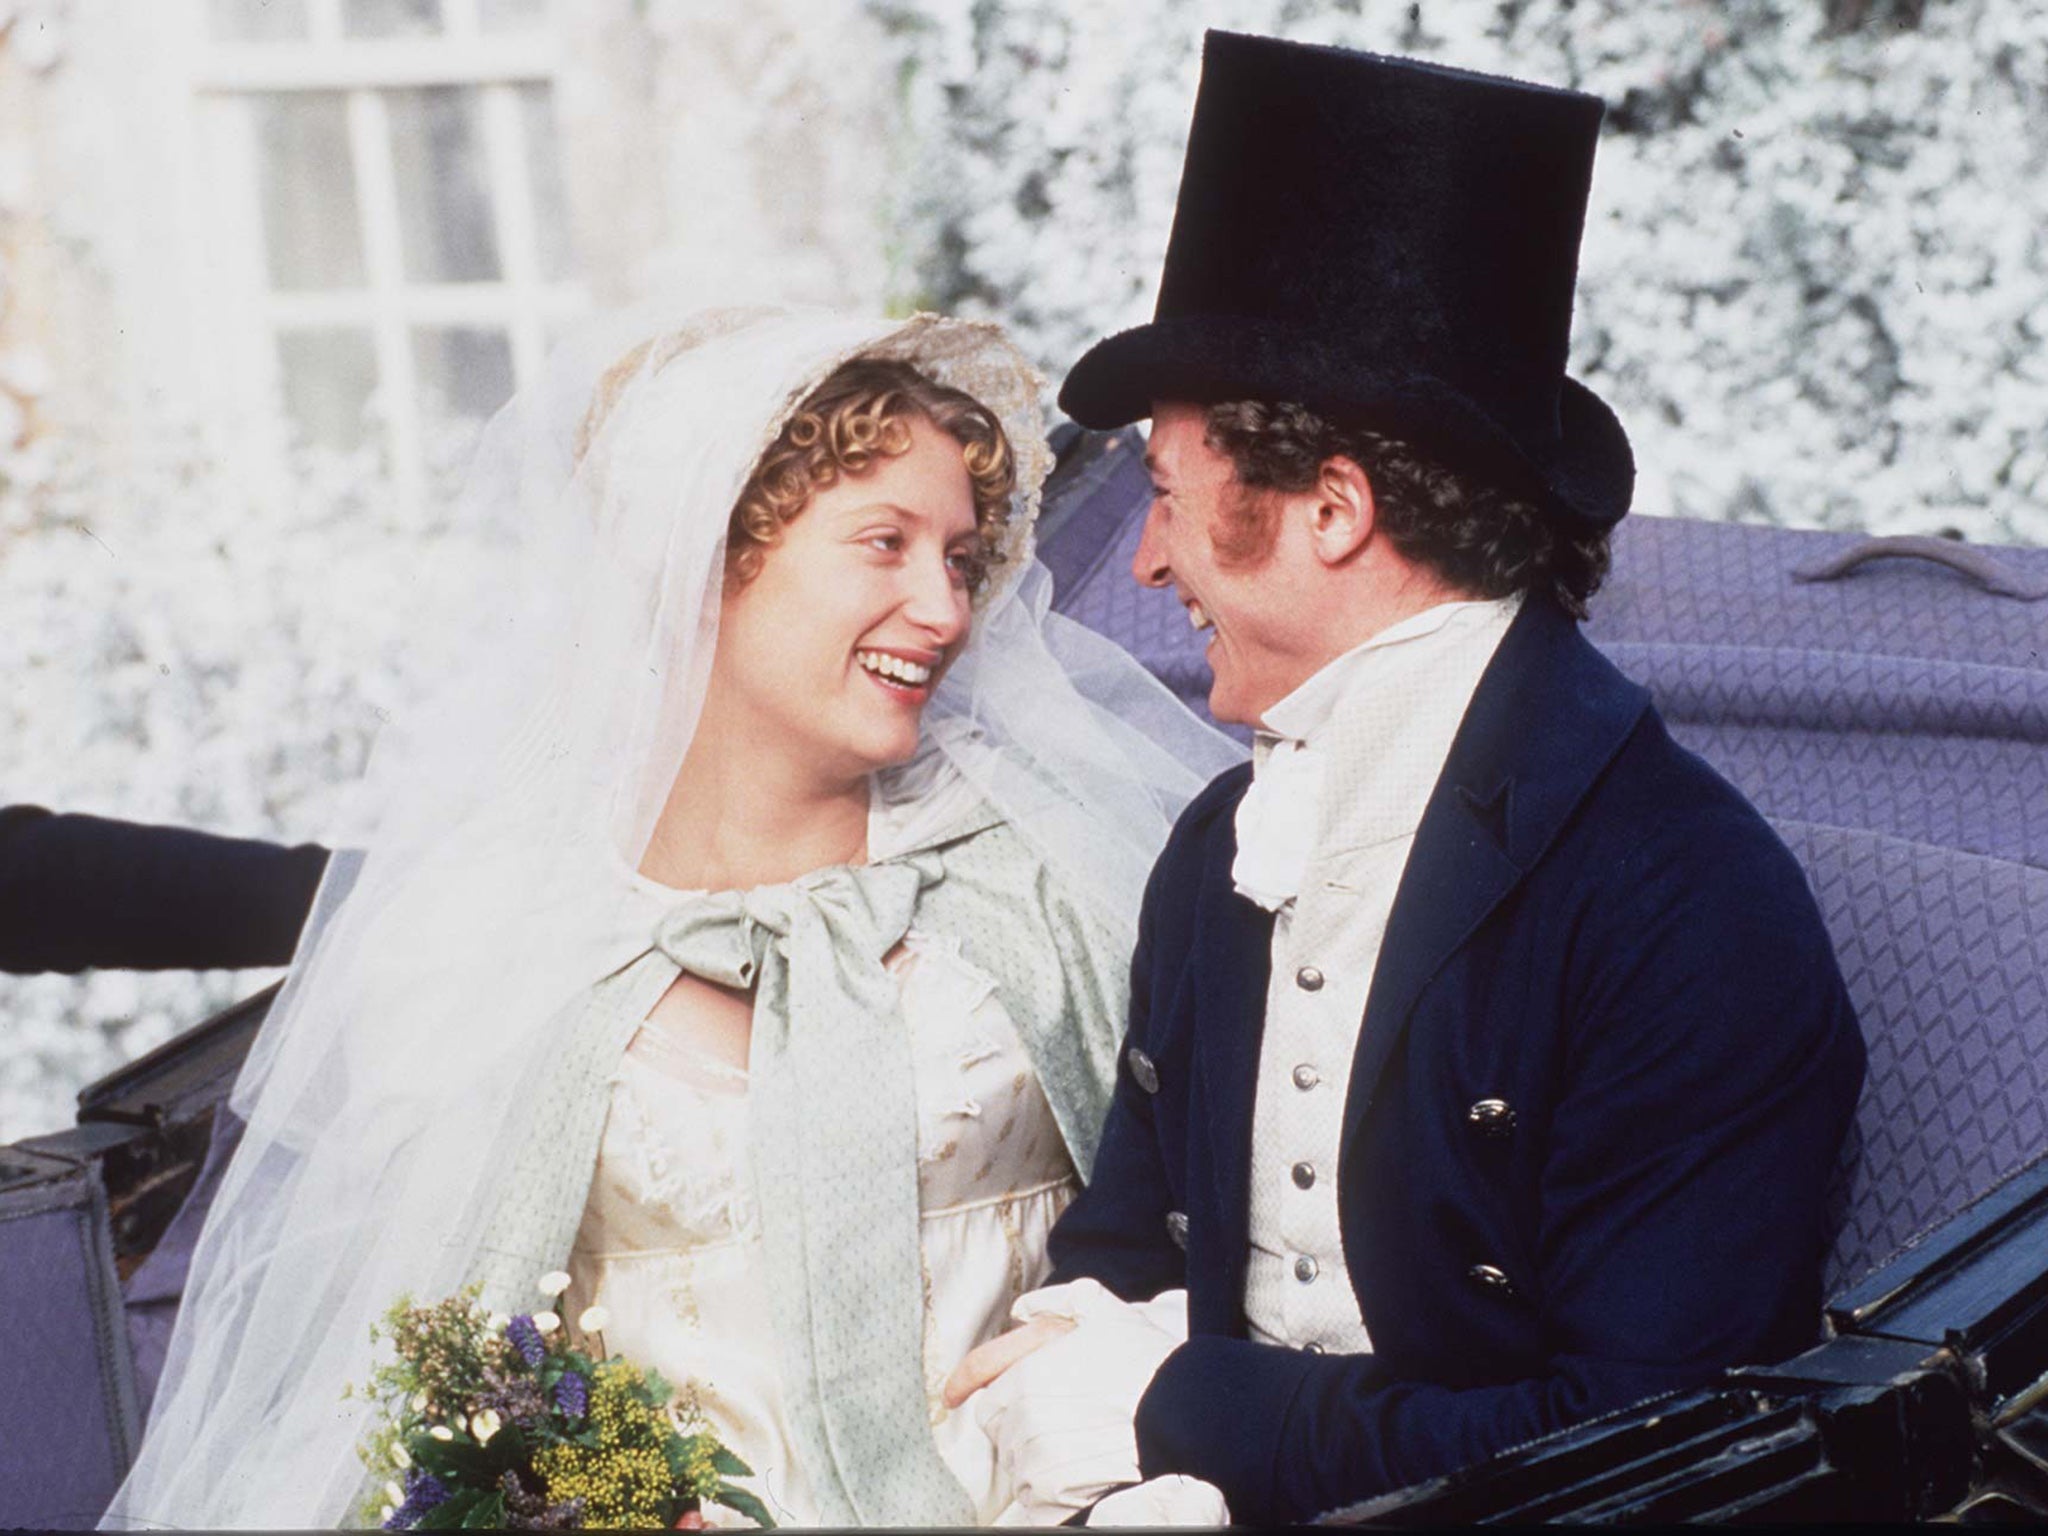 Classic touch: ‘Pride and Prejudice’ also makes the cut